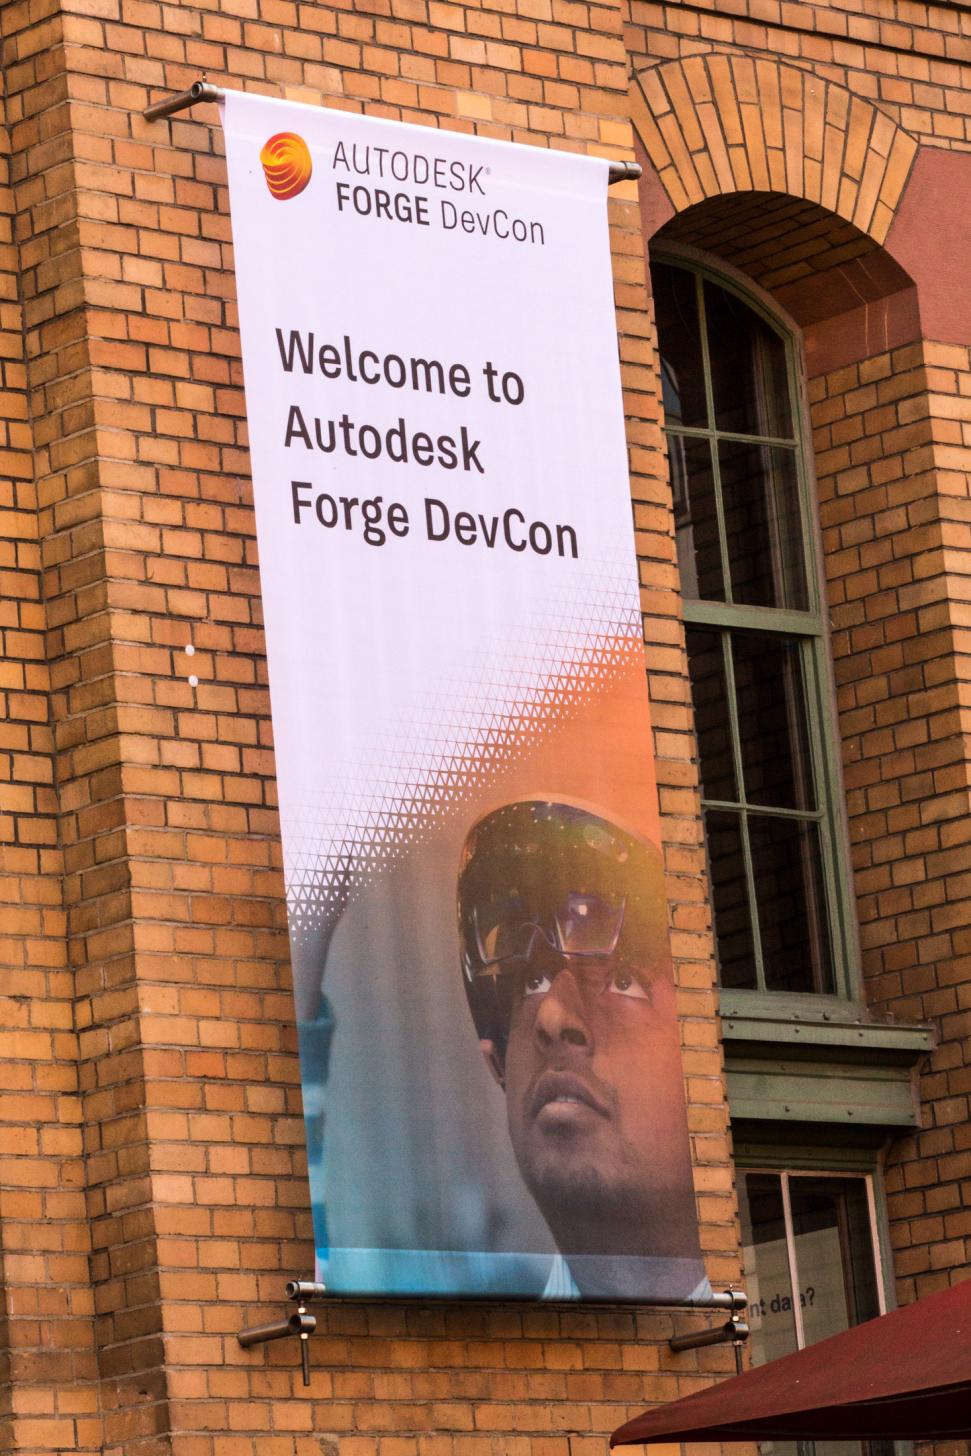 Forge DevCon in Darmstadt keynote speakers have been announced.